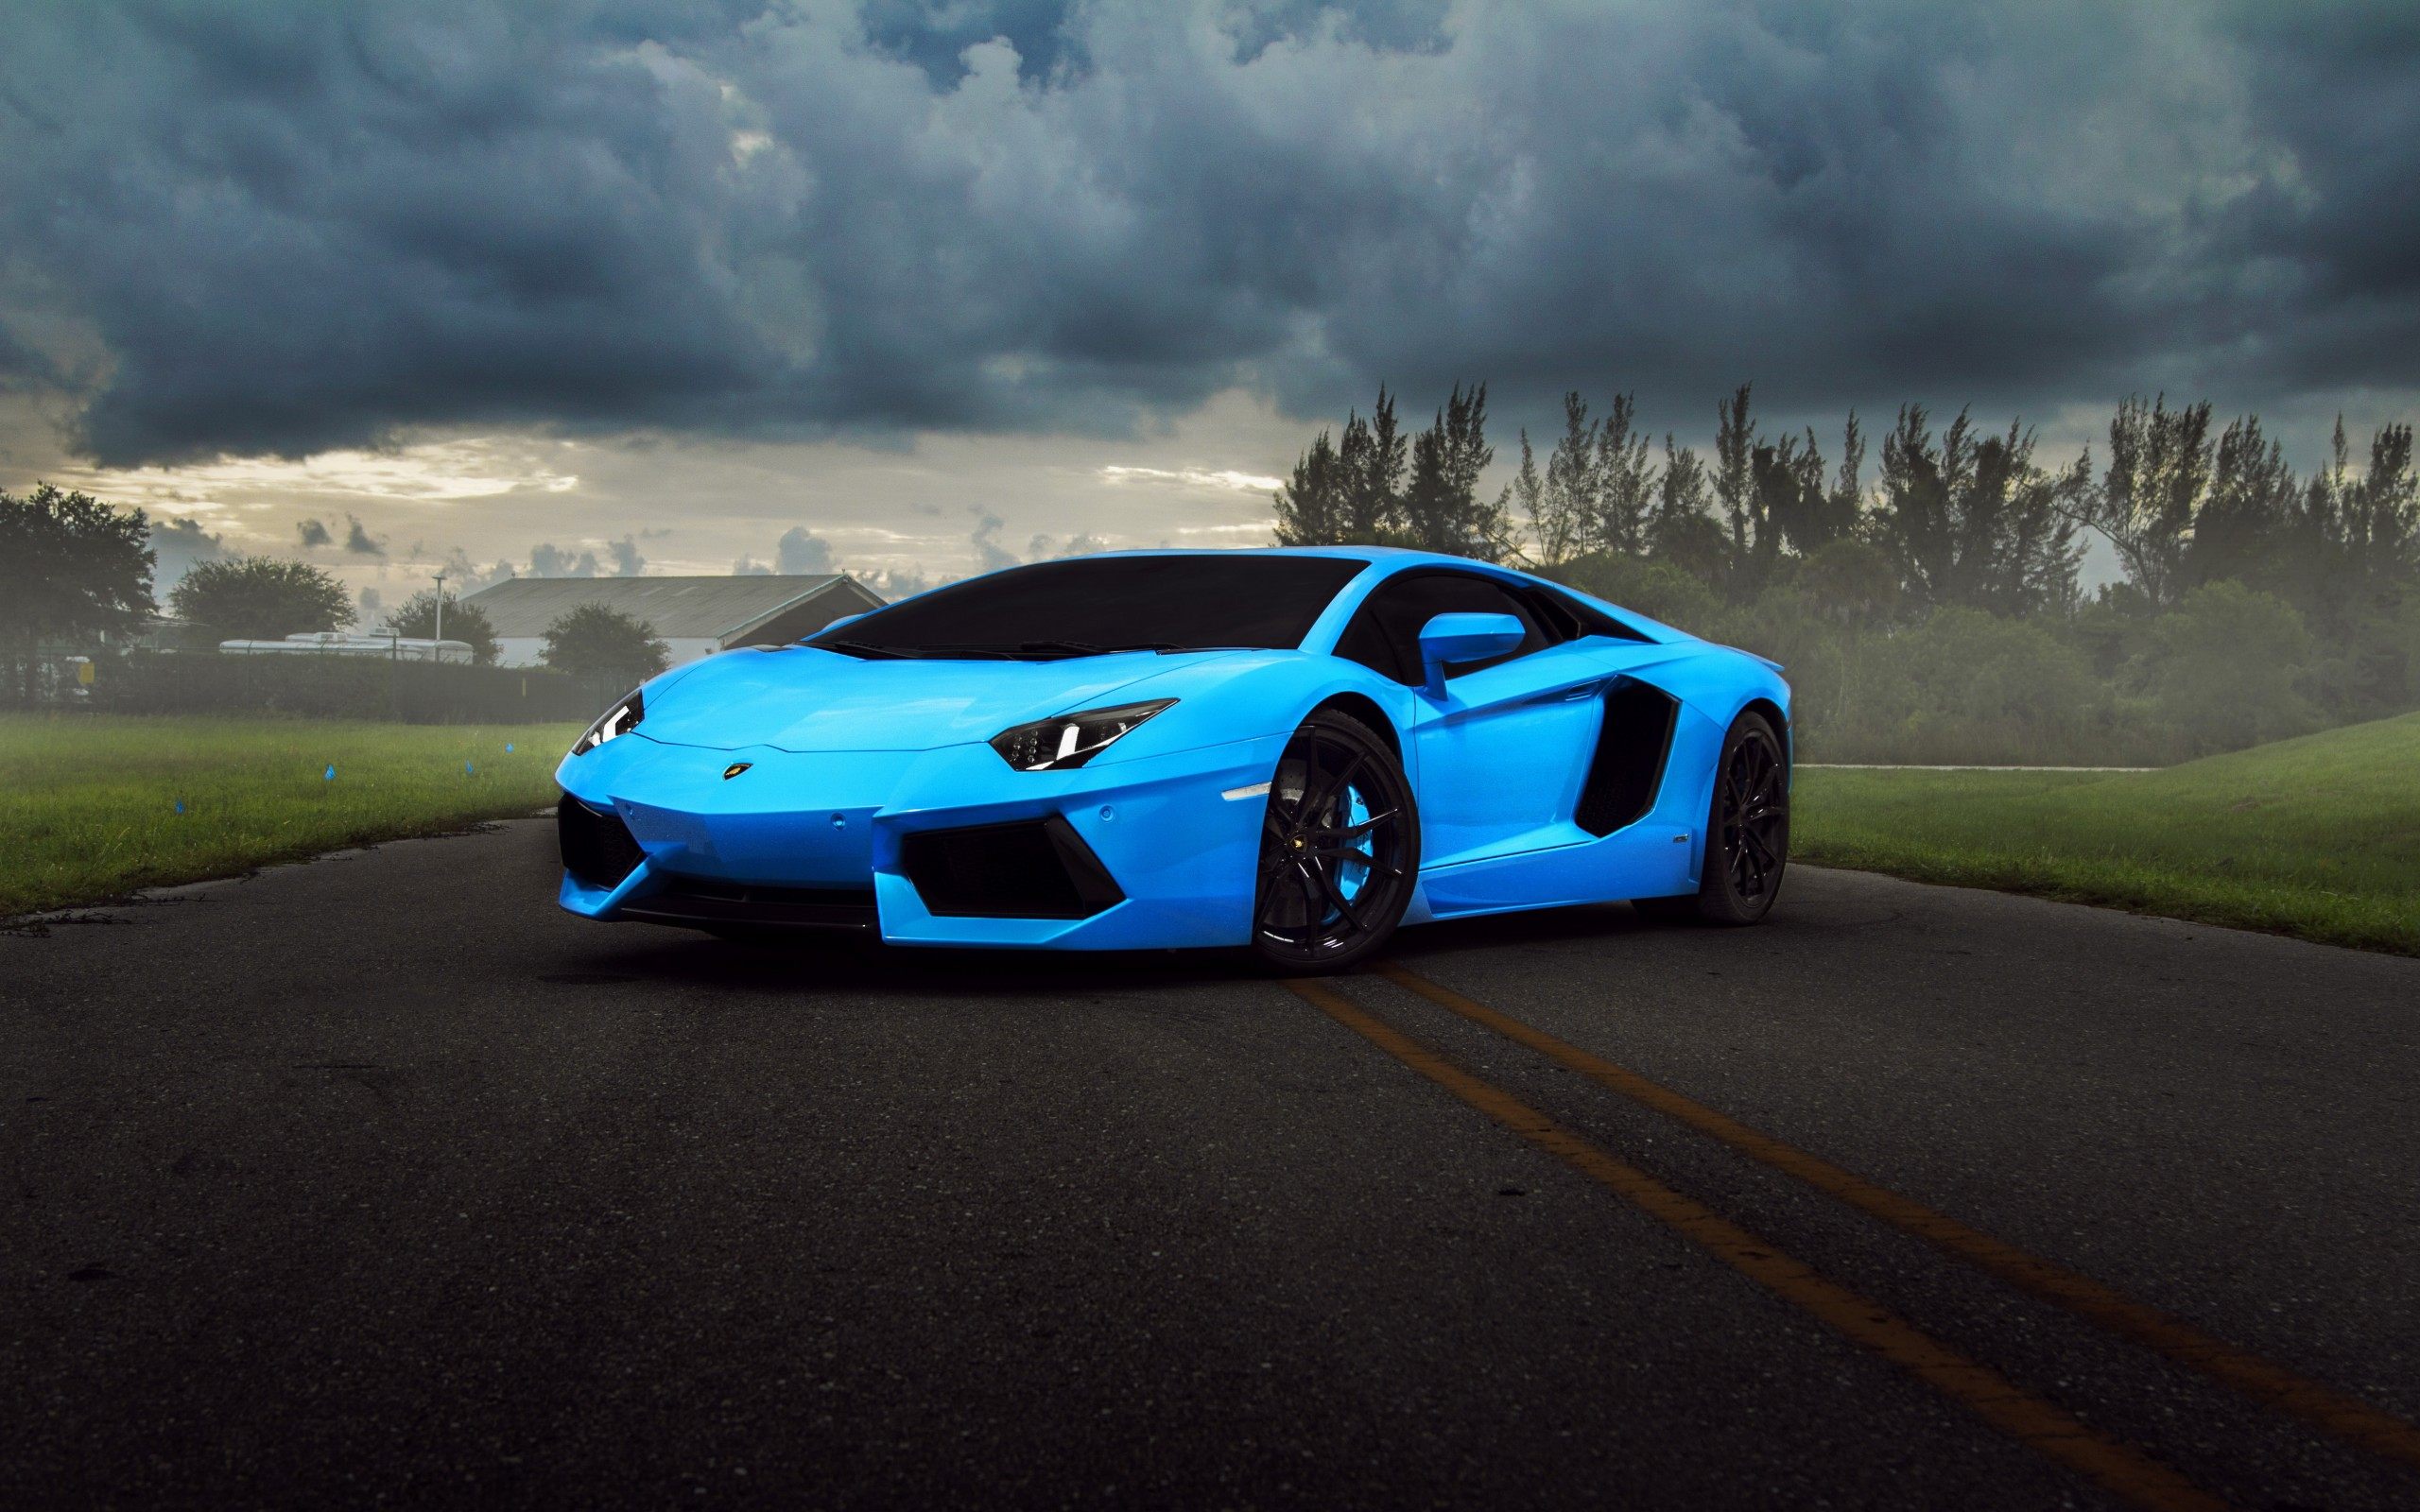 Car Background Hd Images For Editing